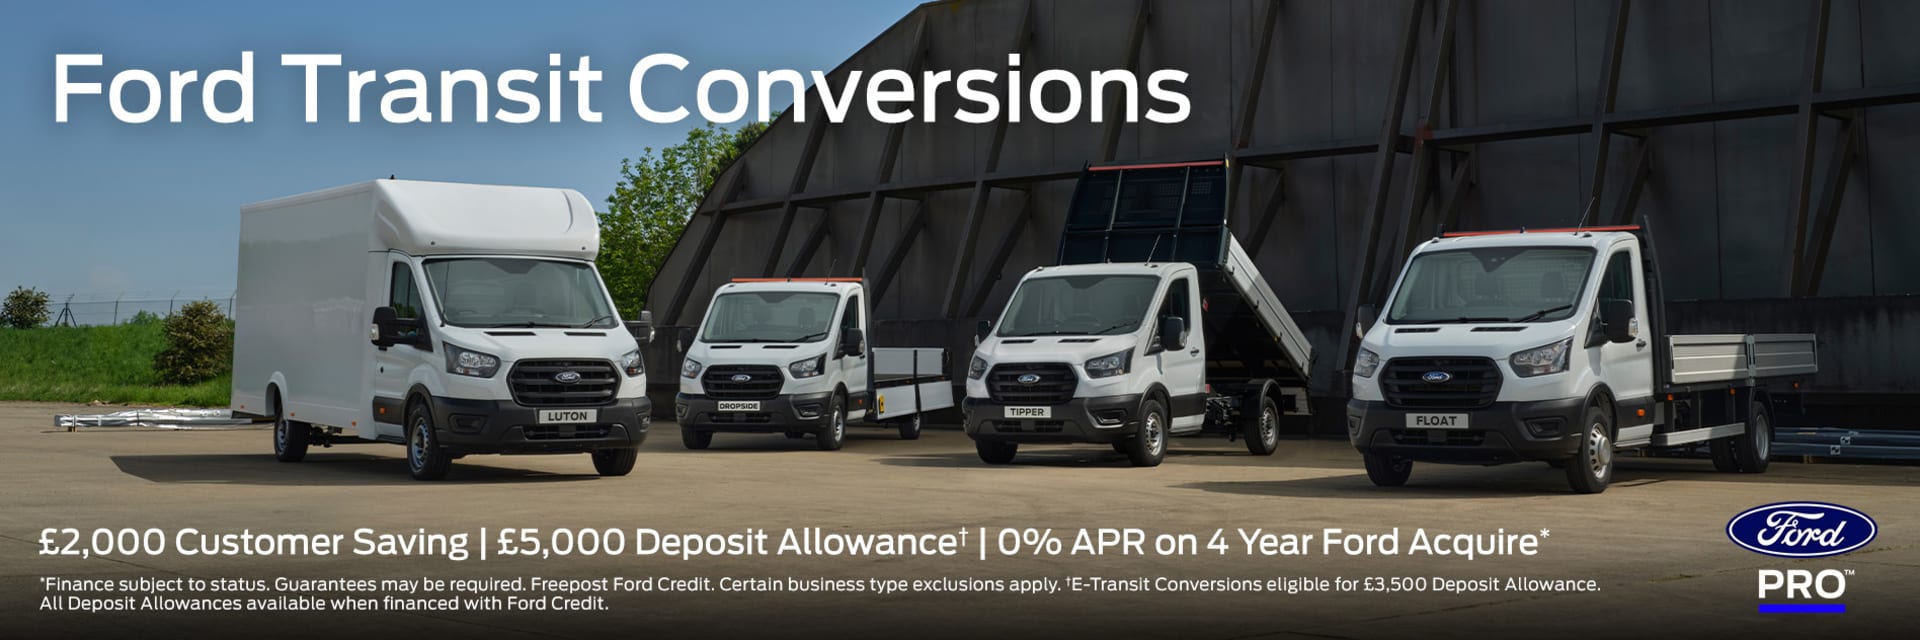 Ford Transit Conversions